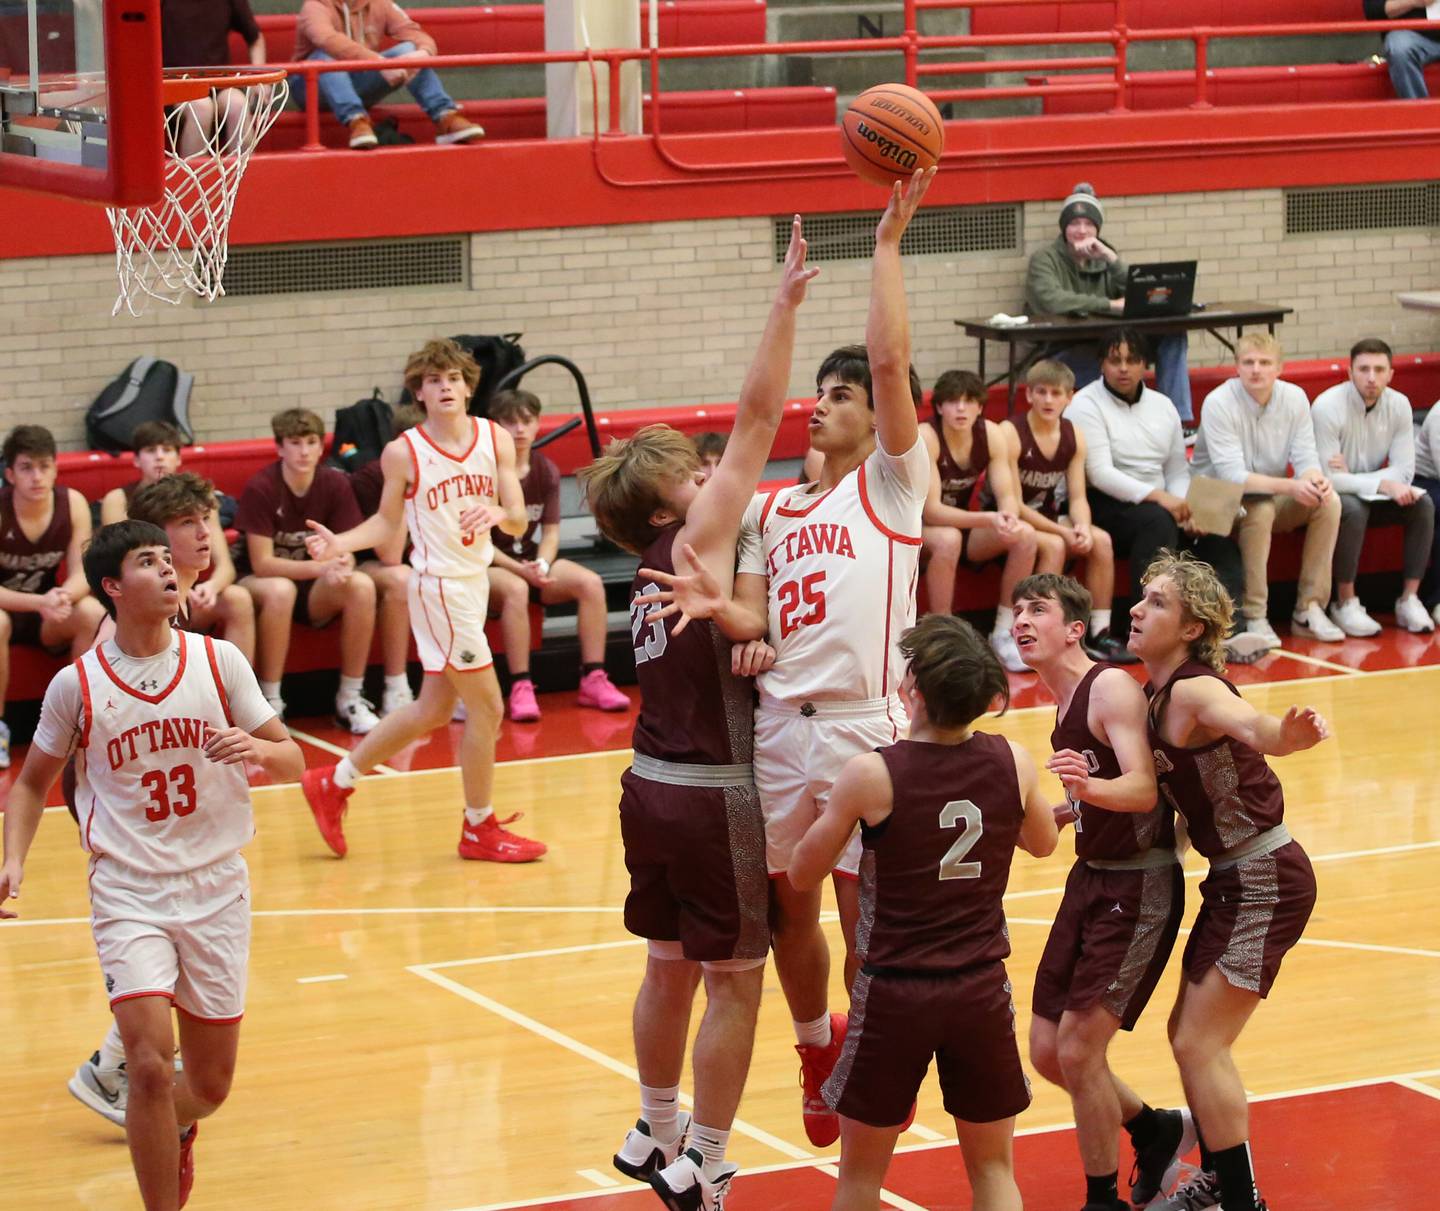 Ottawa’s Payton Knoll (25) gets a shot off in the lane as he is guarded by Marengo defenders during the Dean Riley Shootin’ The Rock Tournament on Monday, Nov. 21, 2022 at Kingman Gymnasium.